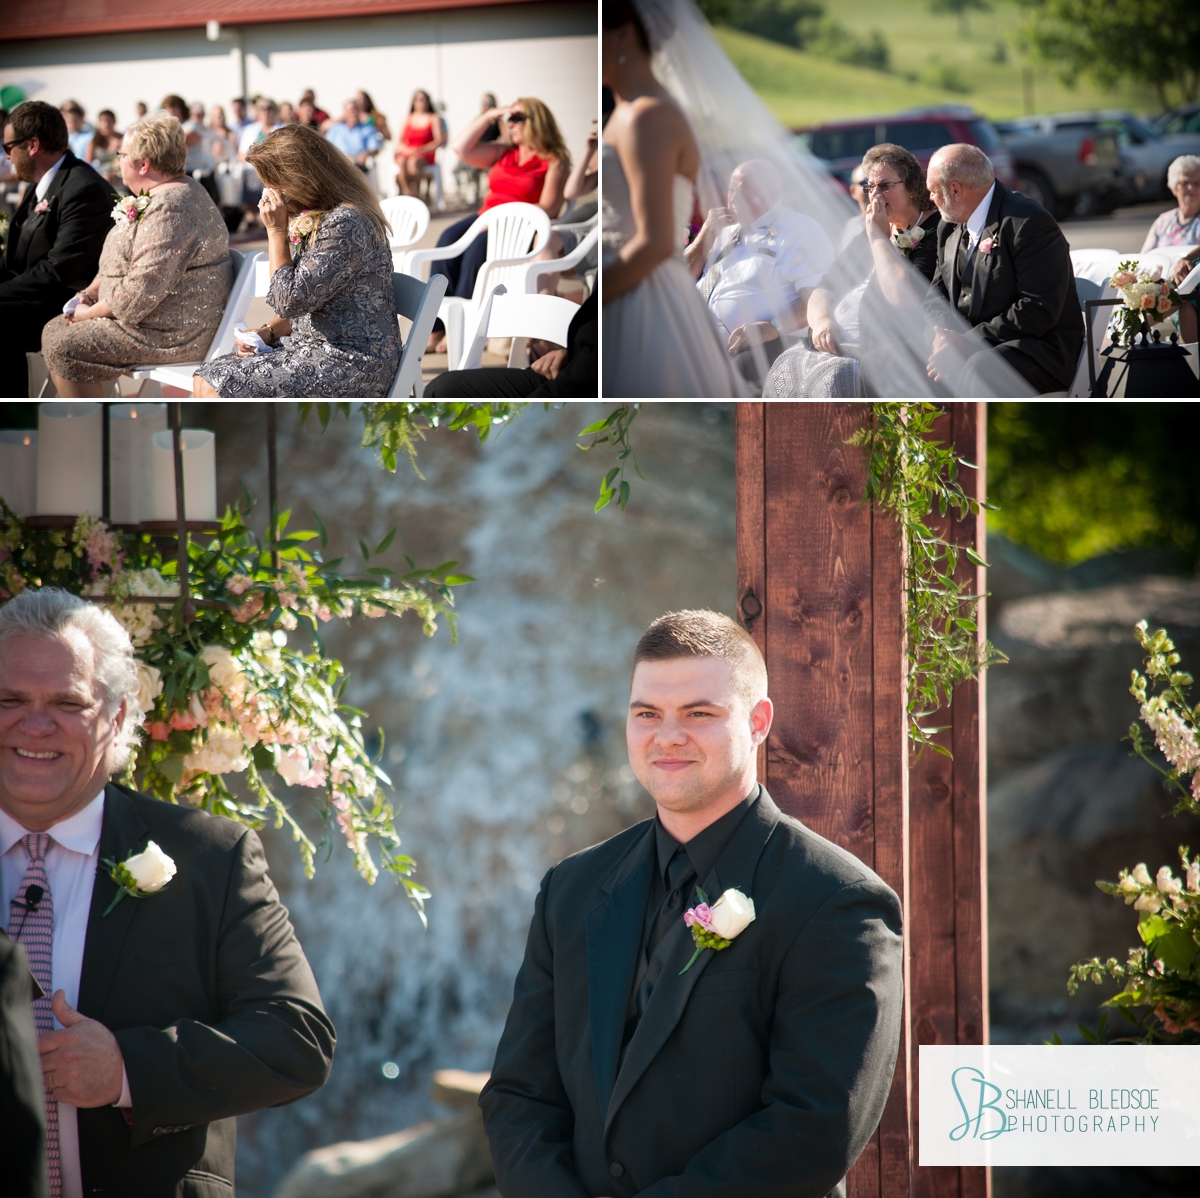 Waterfall wedding ceremony at The Stables in LaFollette, TN